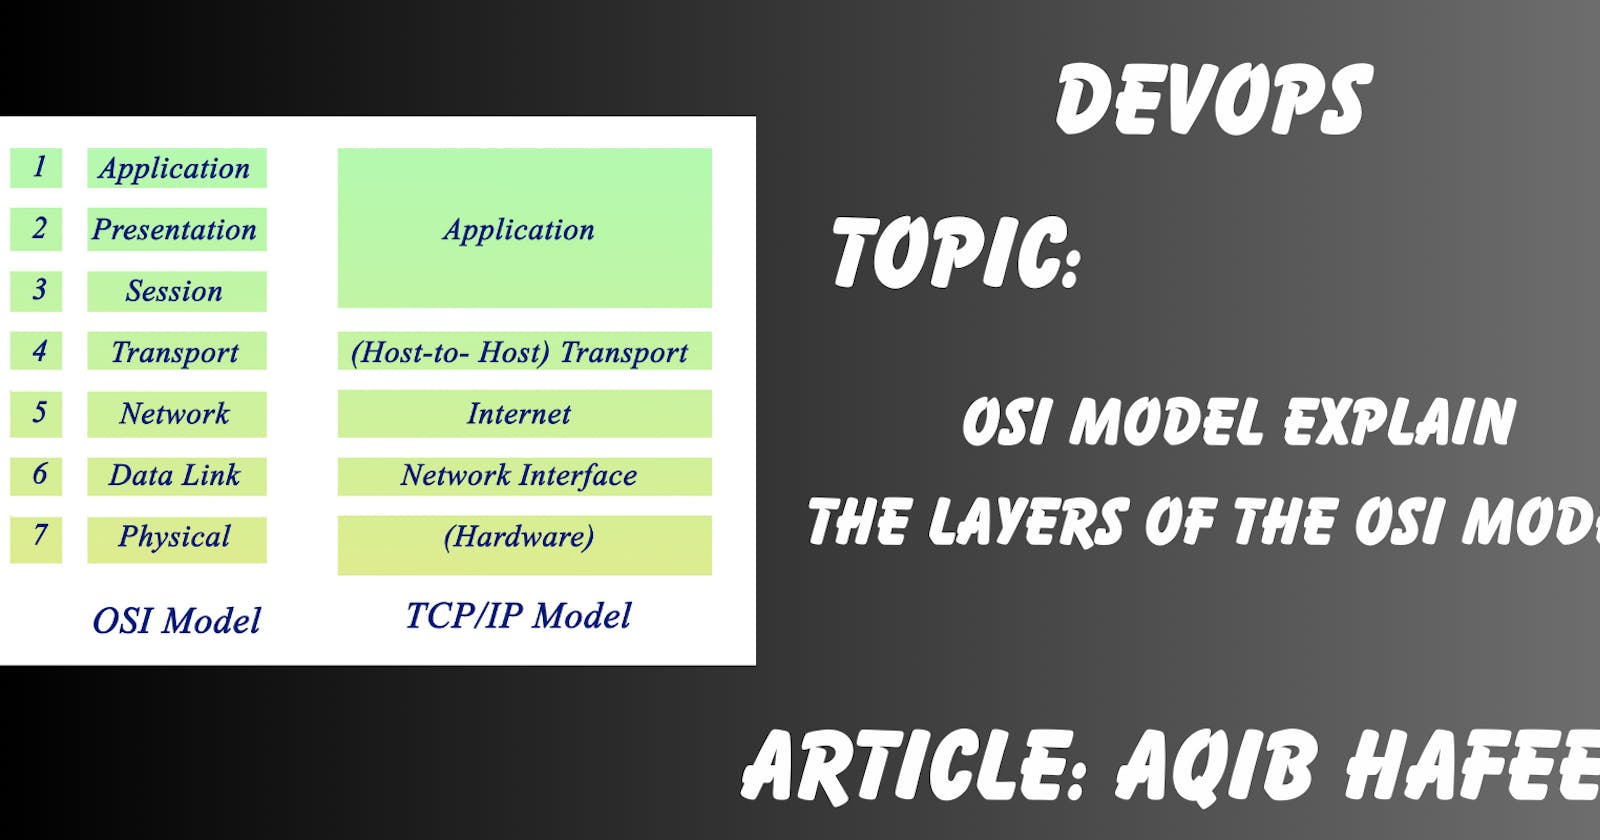 What is the OSI model explain the layers of the OSI model.